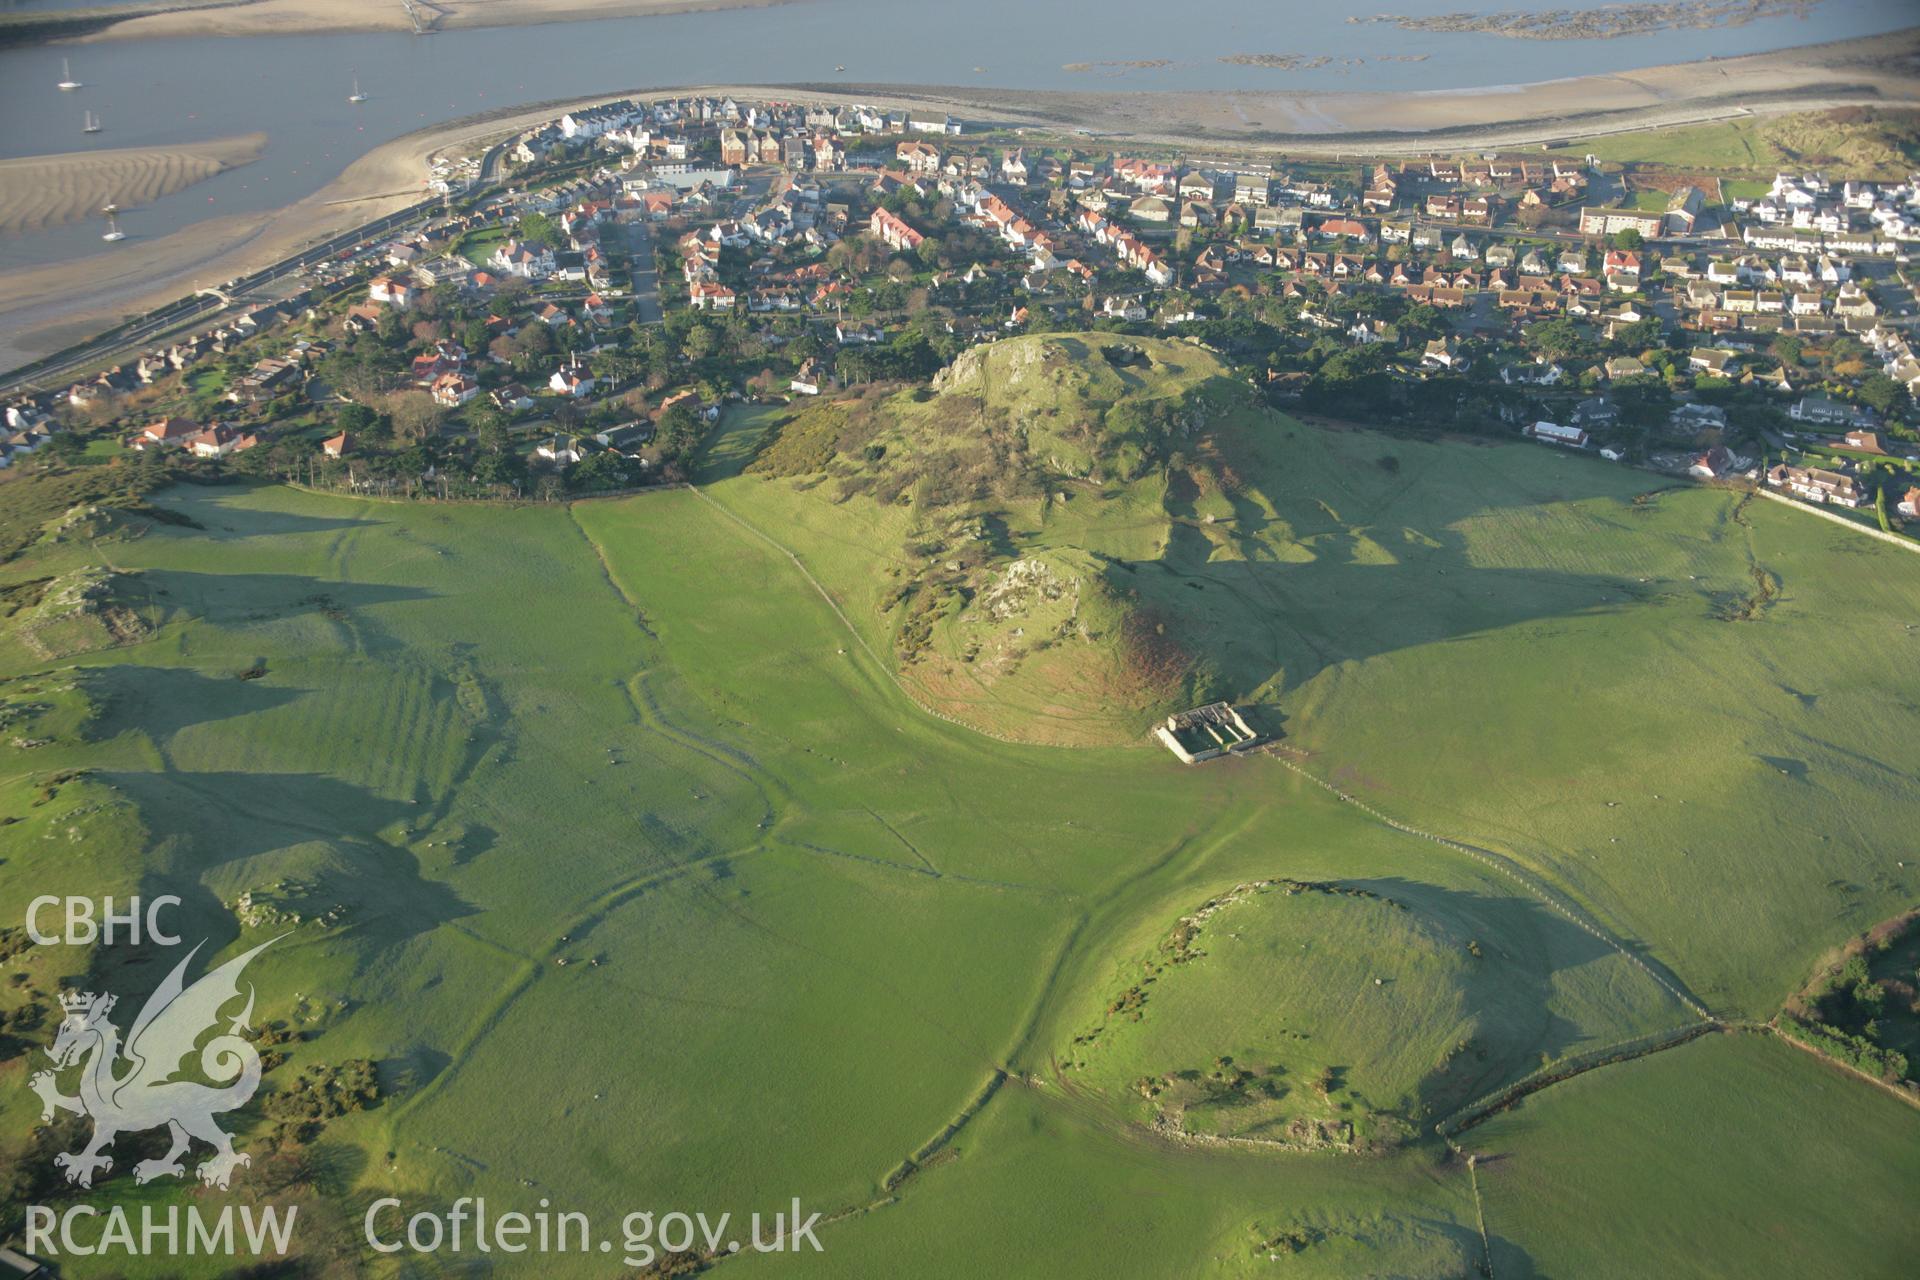 RCAHMW colour oblique aerial photograph of Deganwy Castle and of earthworks of settlement features north-east of the Castle. Taken on 25 January 2007 by Toby Driver